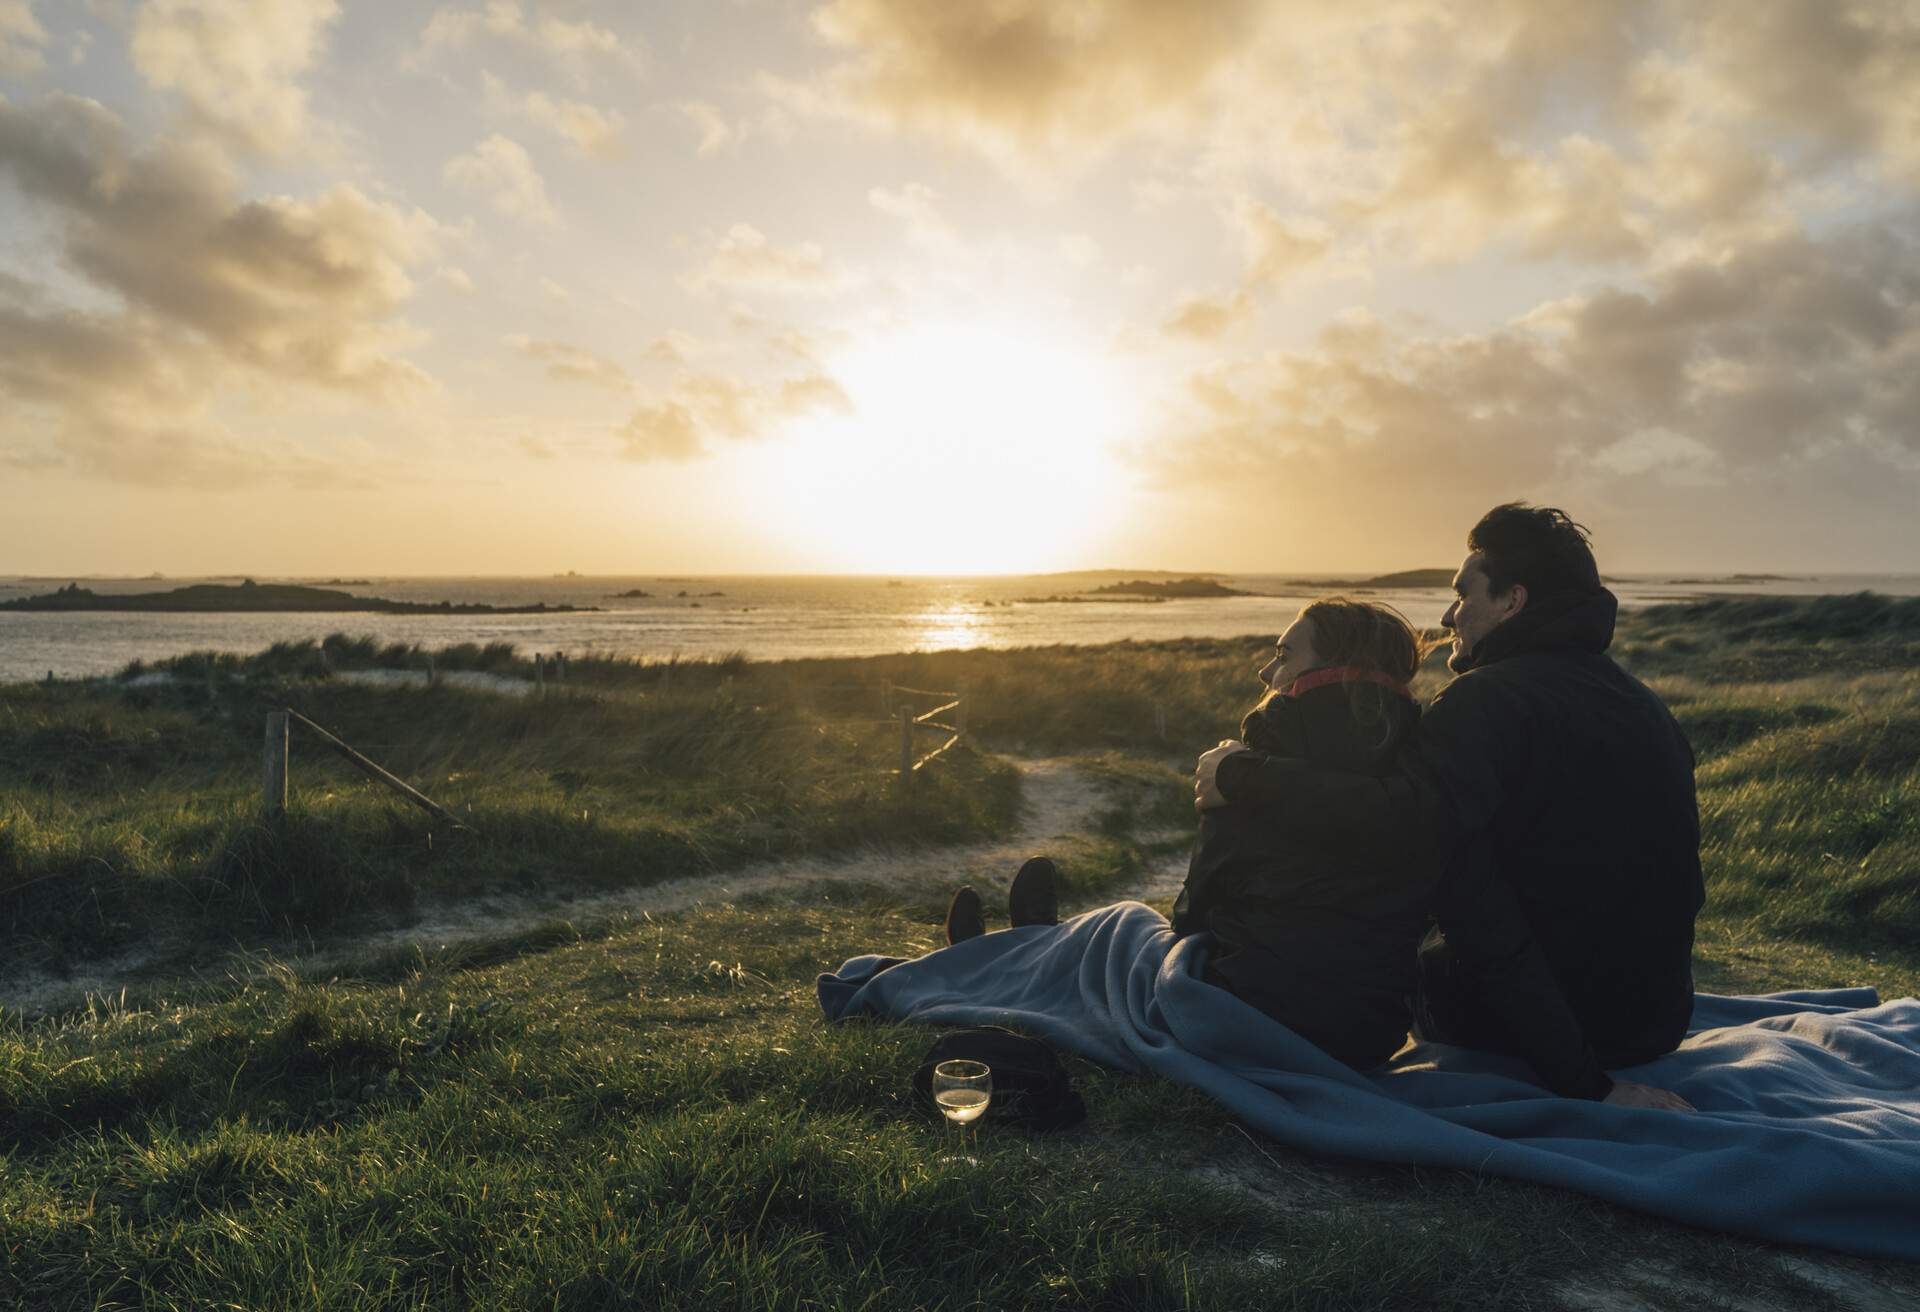 dest_france_brittany_landeda_theme_couple_sunset_people_gettyimages